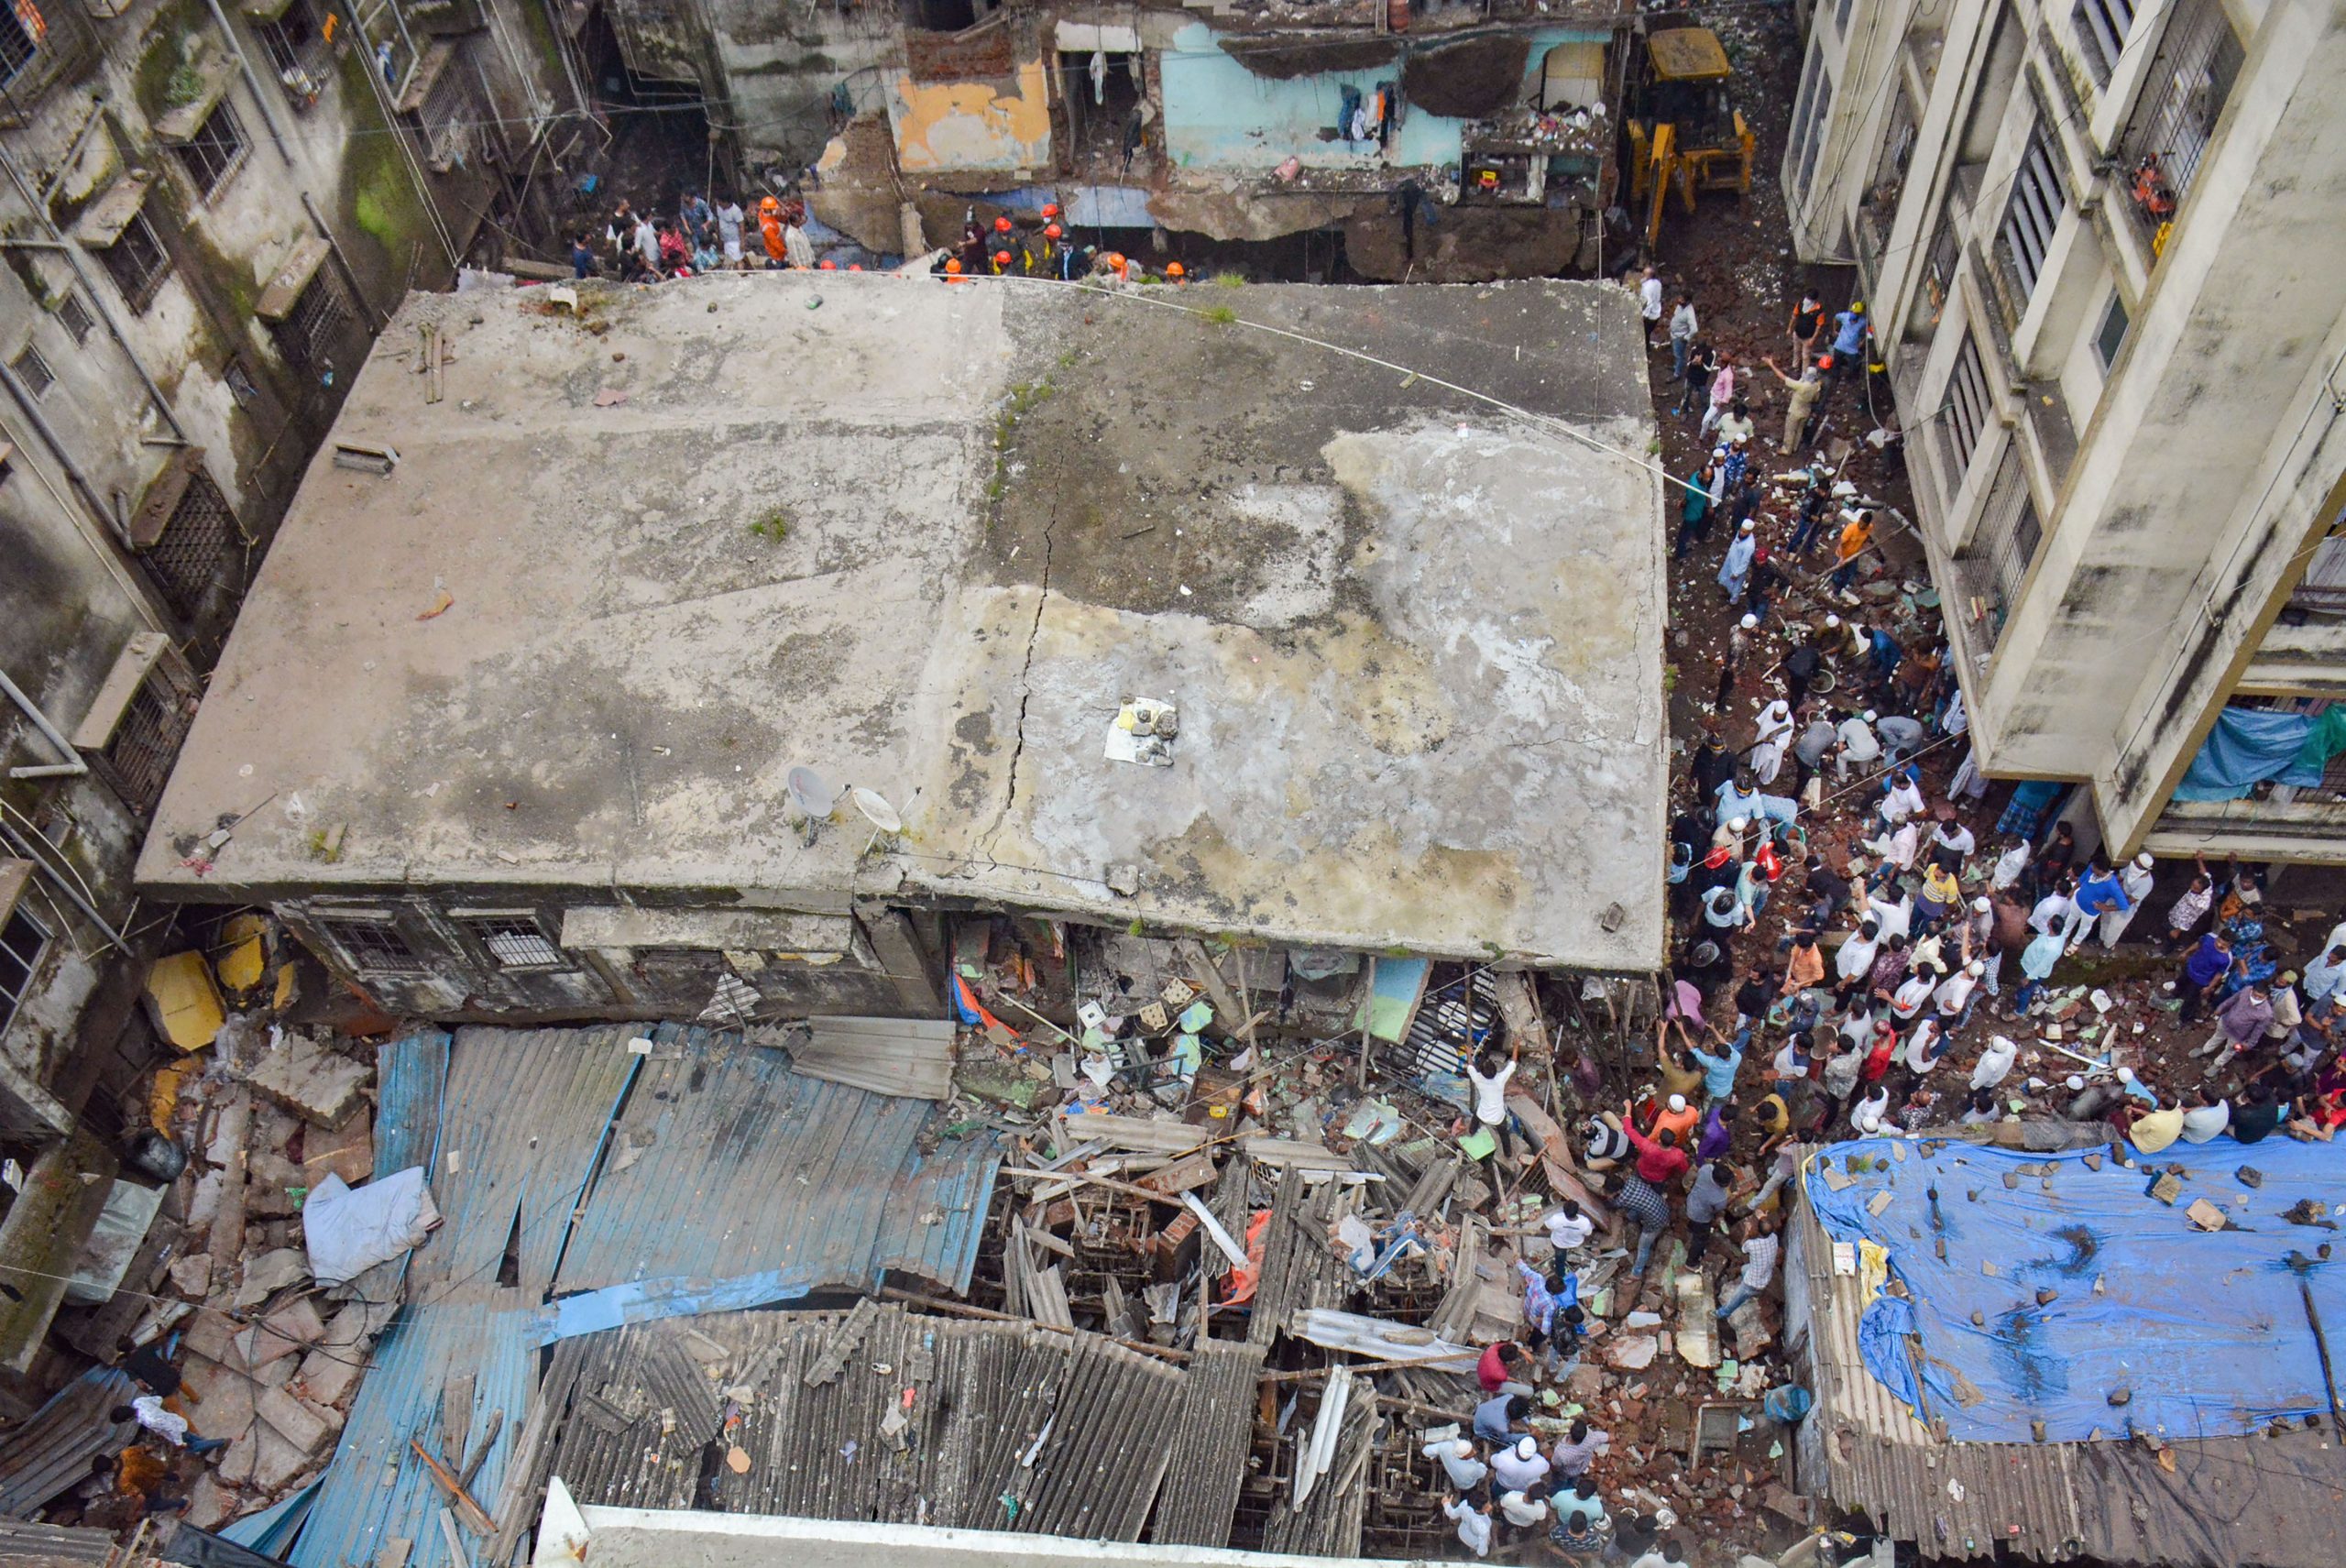 Child rescued from rubble at Bhiwandi’s building collapse site